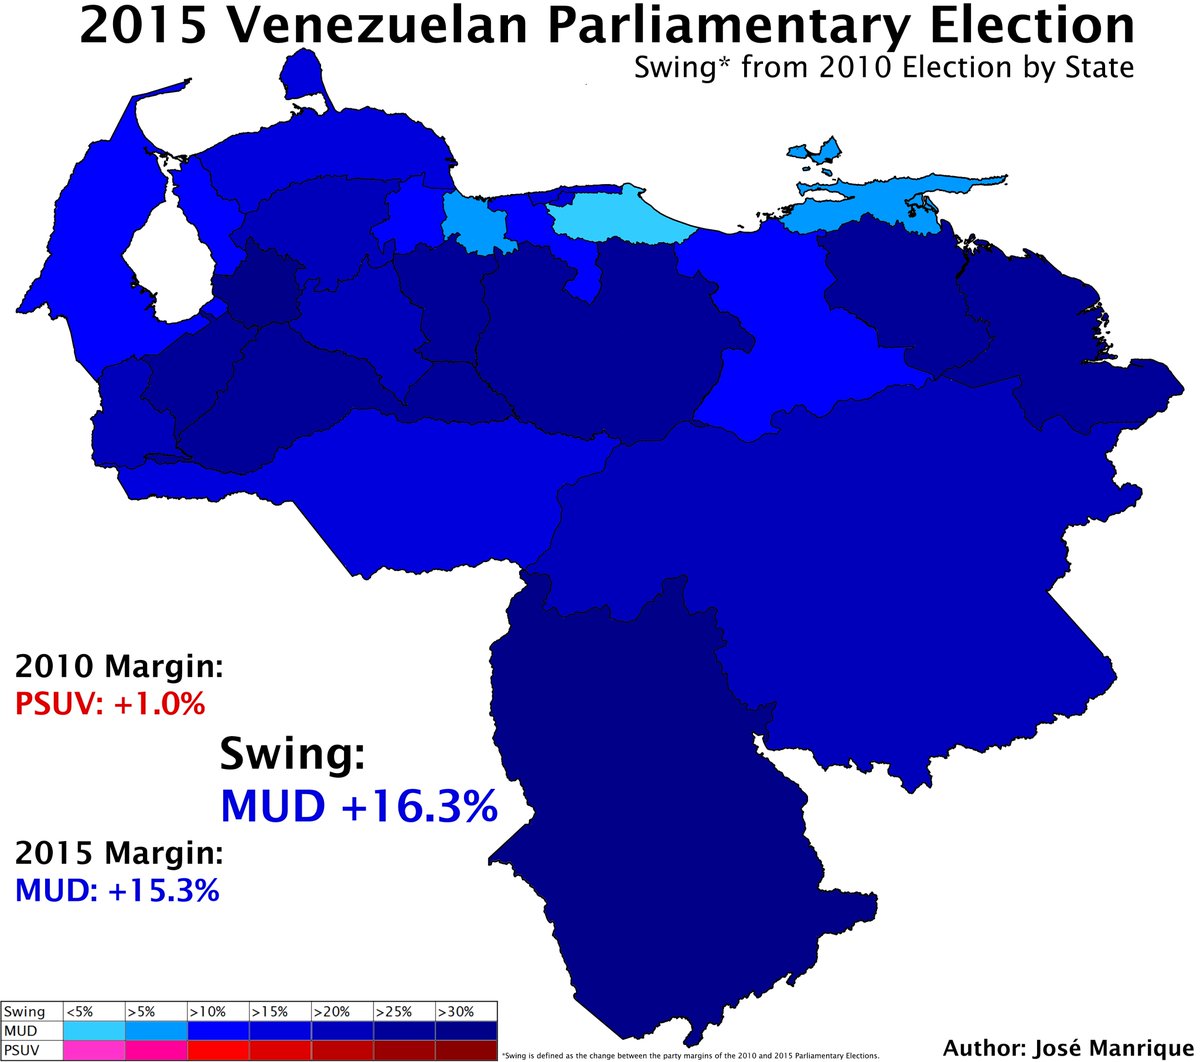 The swing map also shows that every state veered towards the opposition. The shift wasn't so drastic in Miranda, Nueva Esparta, Sucre, and Carabobo, because the opposition had already performed unusually well there in the 2010 election.